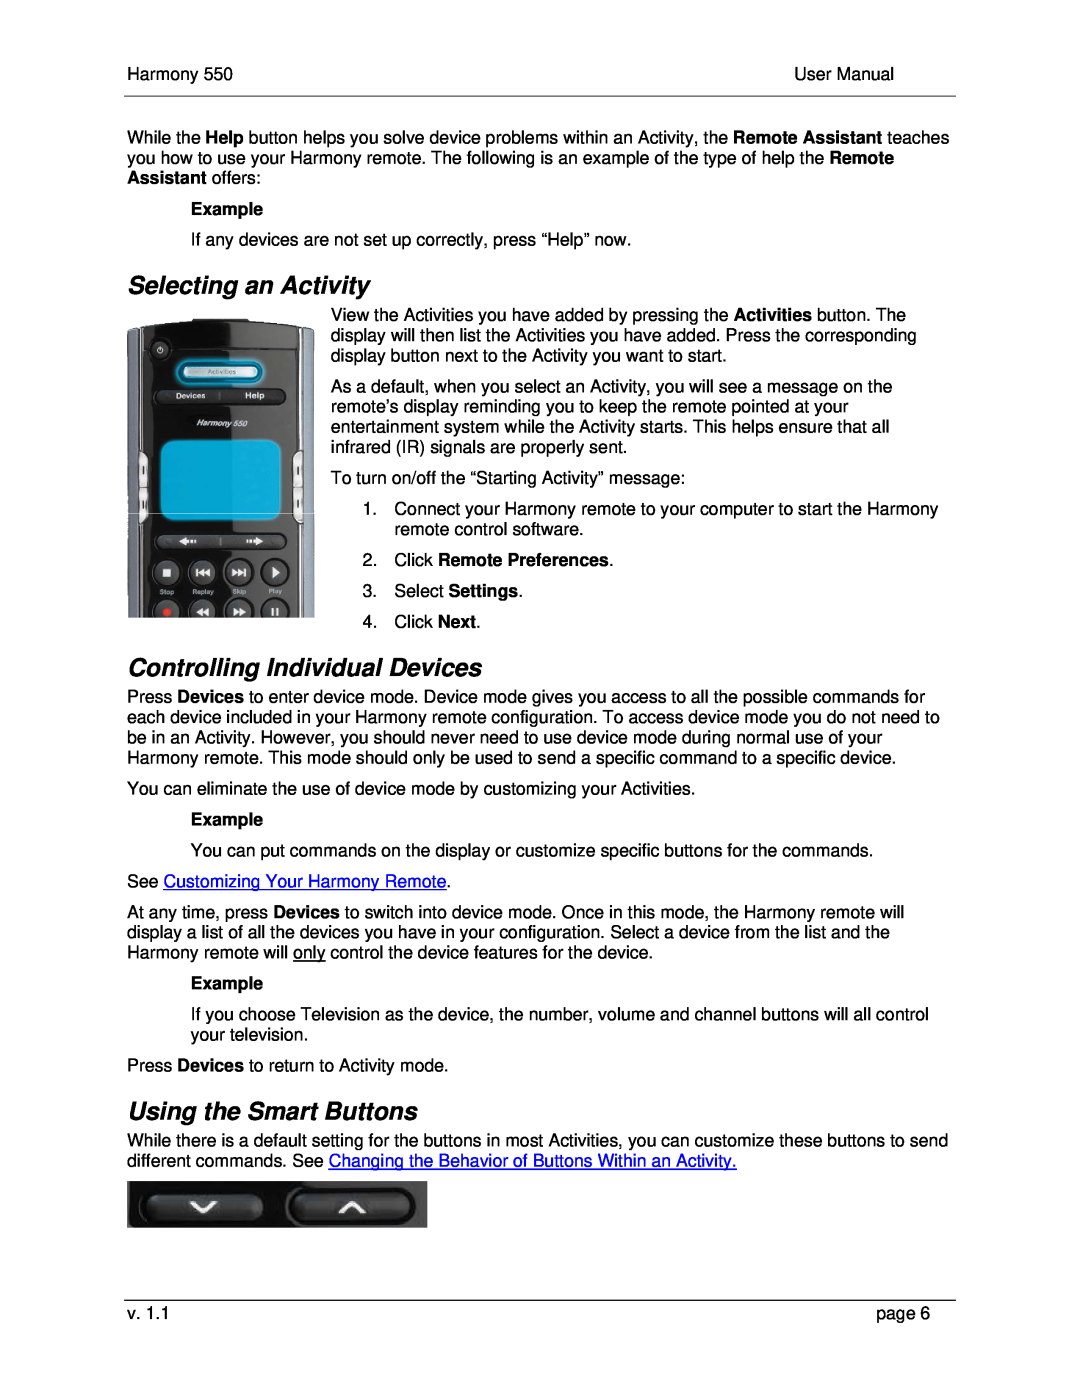 Logitech 550 user manual Selecting an Activity, Controlling Individual Devices, Using the Smart Buttons, Example 